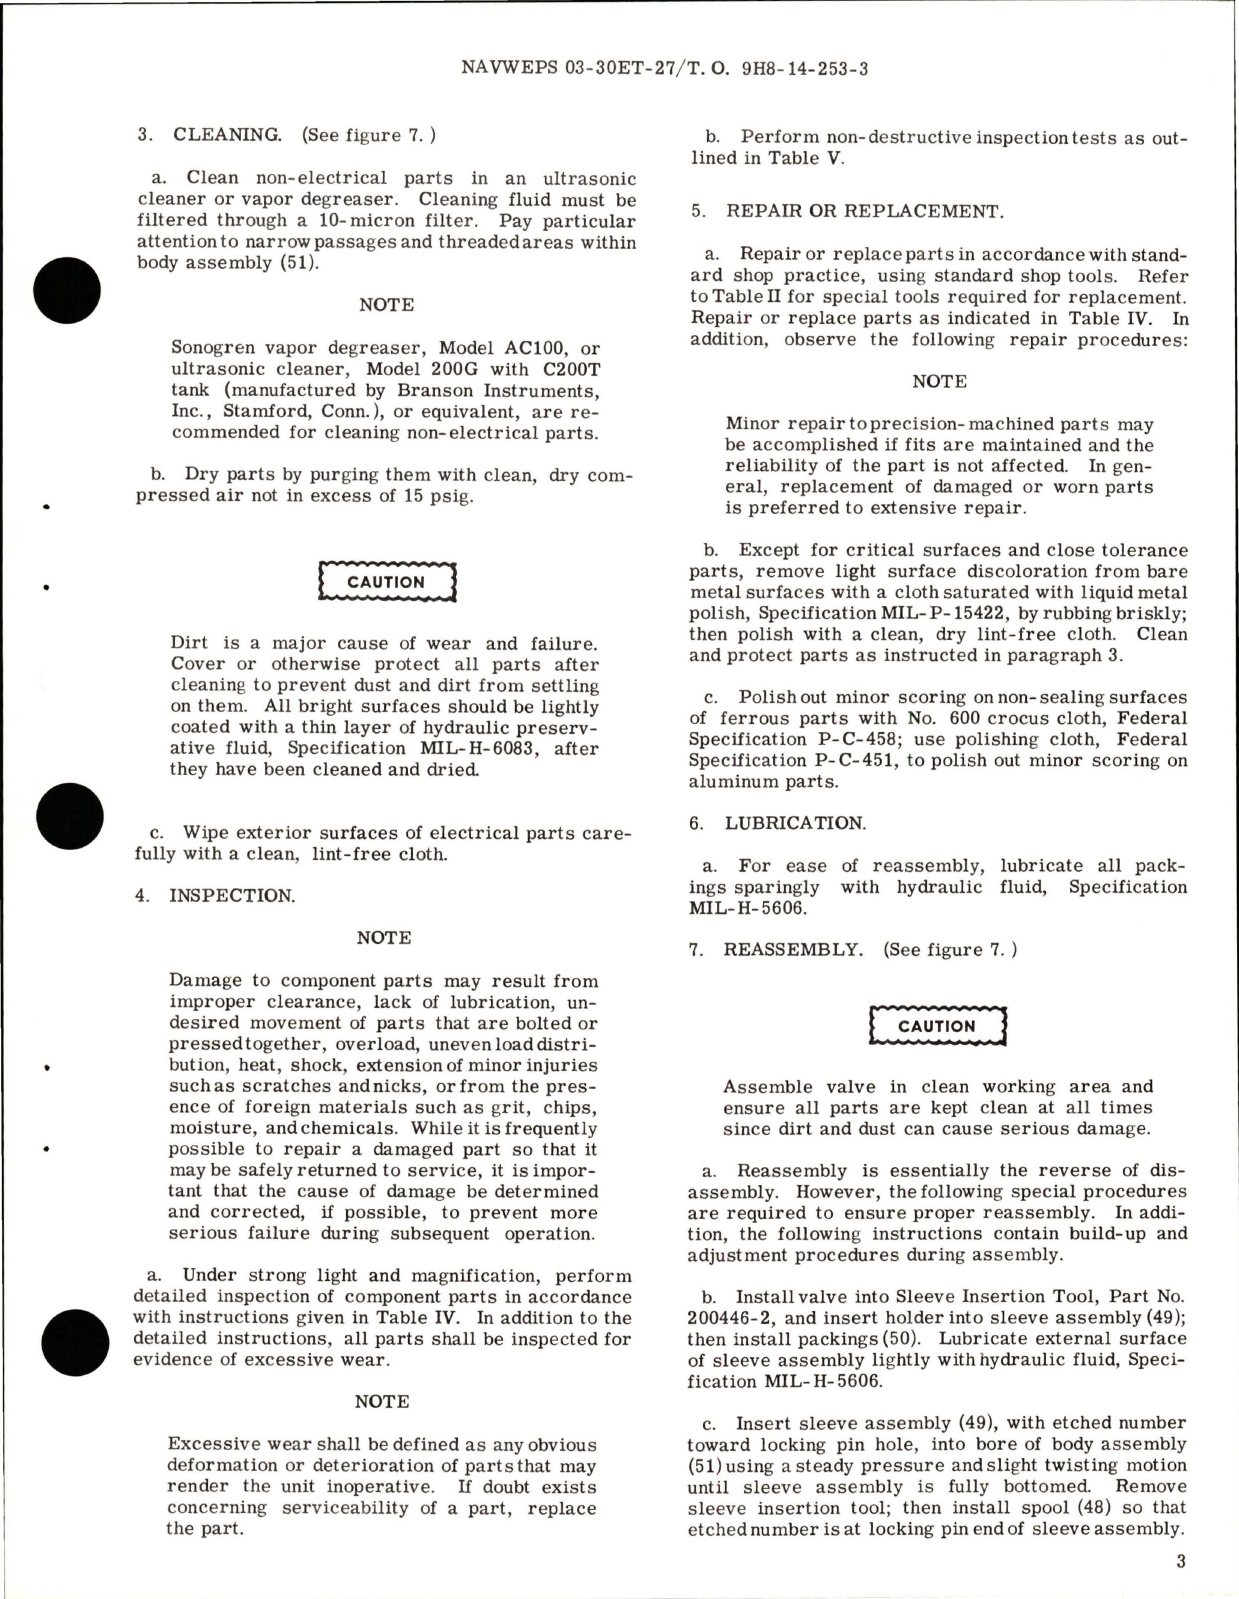 Sample page 5 from AirCorps Library document: Overhaul Instructions with Illustrated Parts for Four-Way Operated Dry Coil Servo Valve - Parts 205400 and 205400A